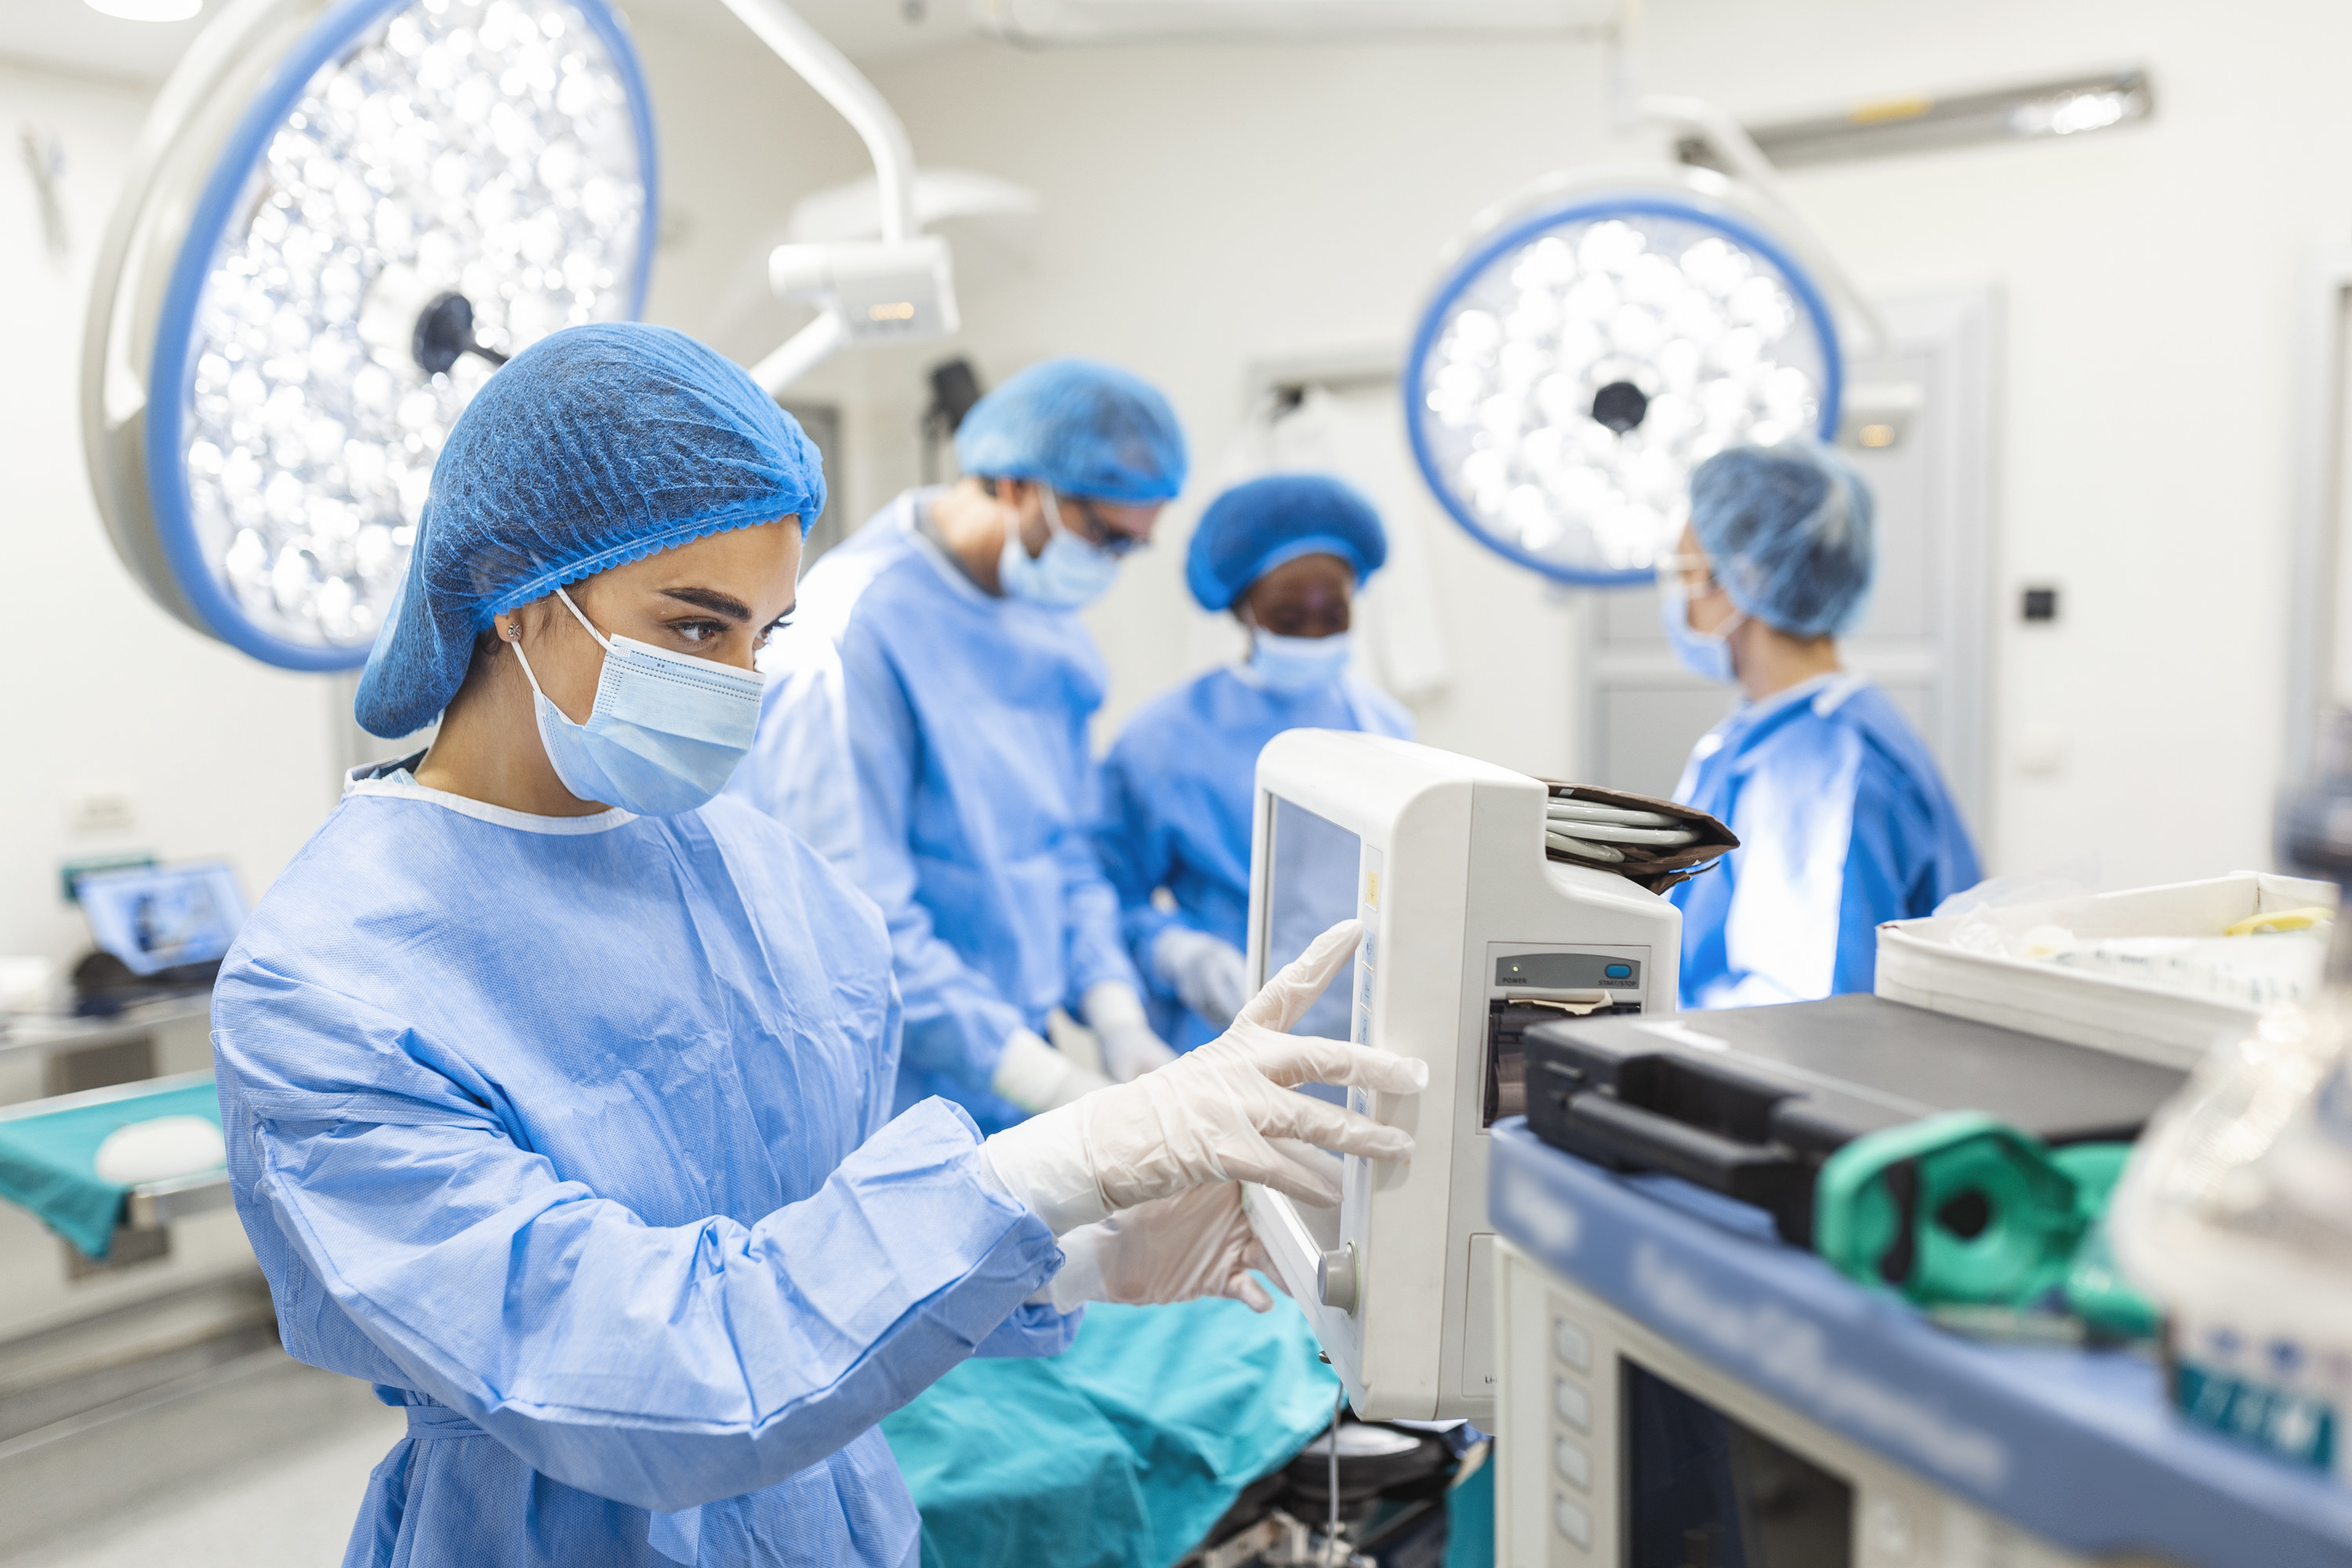 Anesthesiologist keeping track of vital functions of the body during cardiac surgery